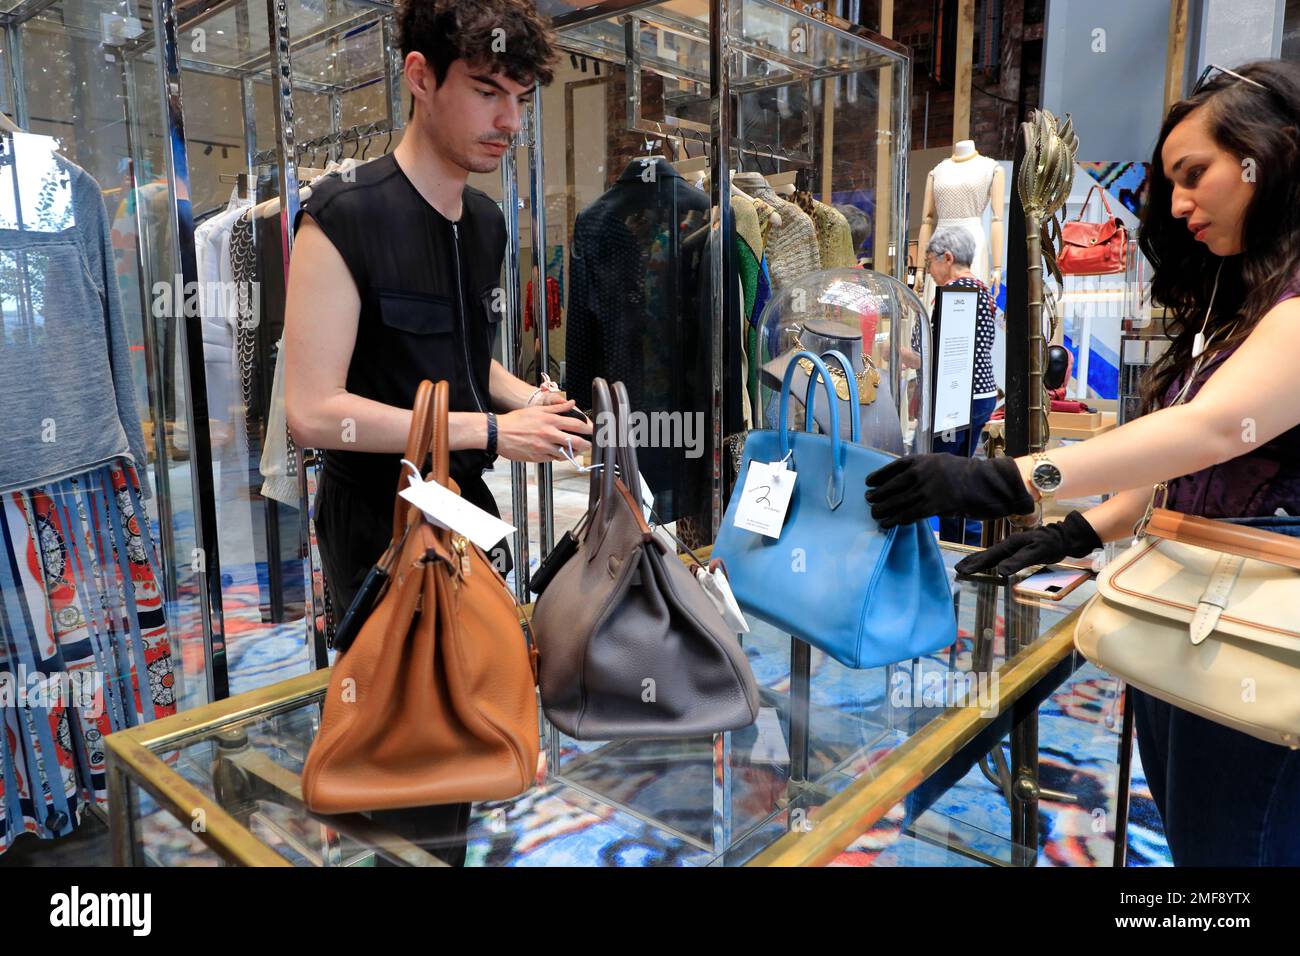 A male salesperson showing vintage Hermes handbags to customer in 2e Printemps (Second Printemps) the secondhand clothes and accessories store in 7ieme Ciel (Seventh Heaven) on the 7th floor of Au Printemps Haussmann.Paris.France Stock Photo